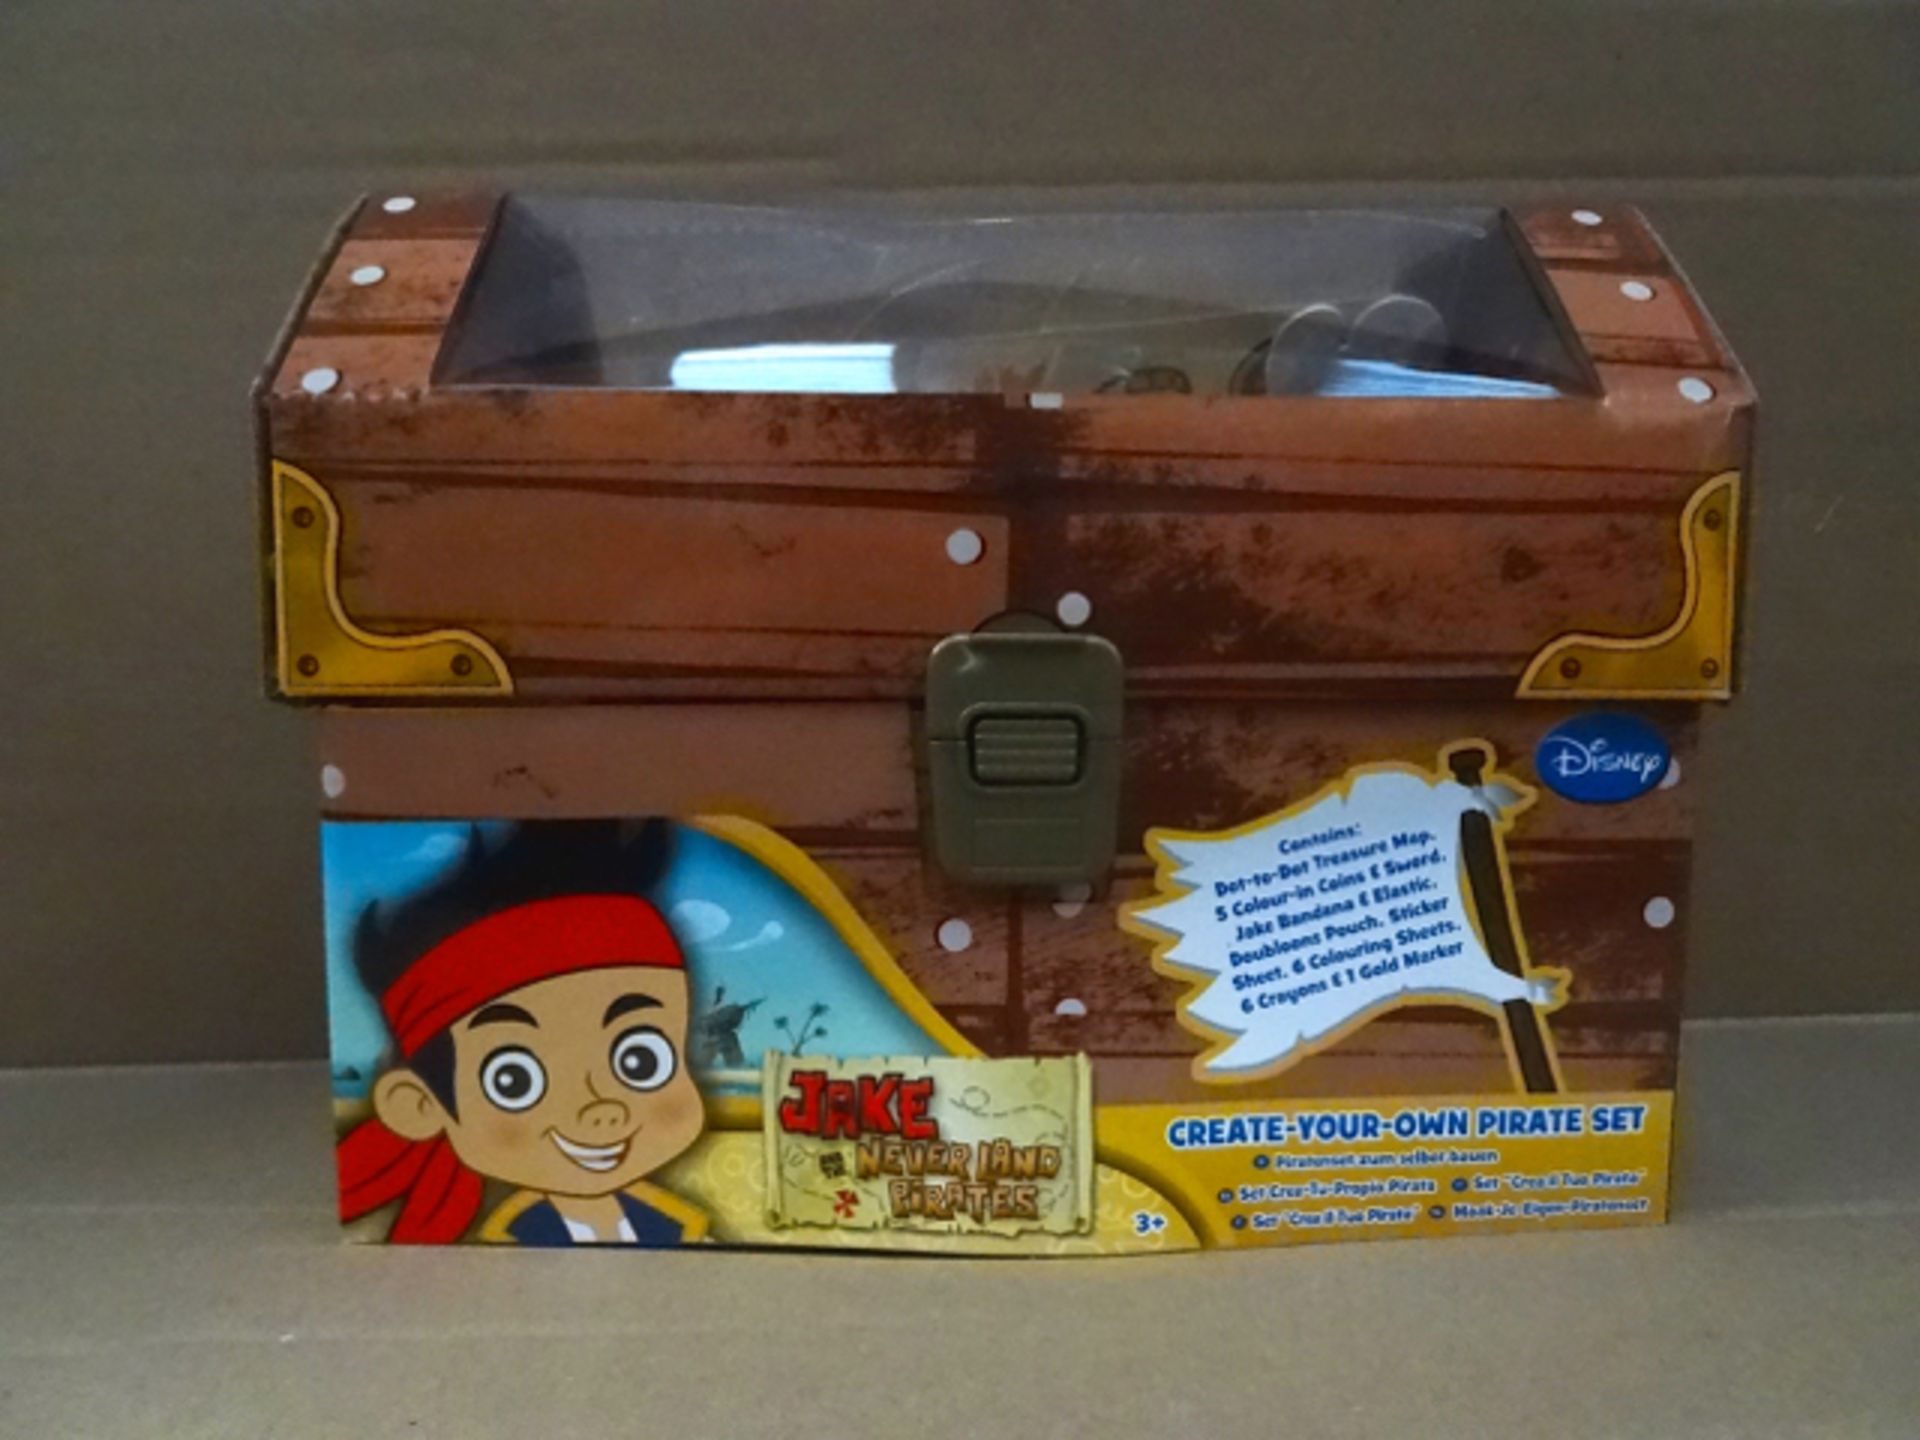 1 x Pallet to contain 240 x Disney Jake the Neverland Pirate Create Your Own Pirate Set. RRP £20 - Image 2 of 4